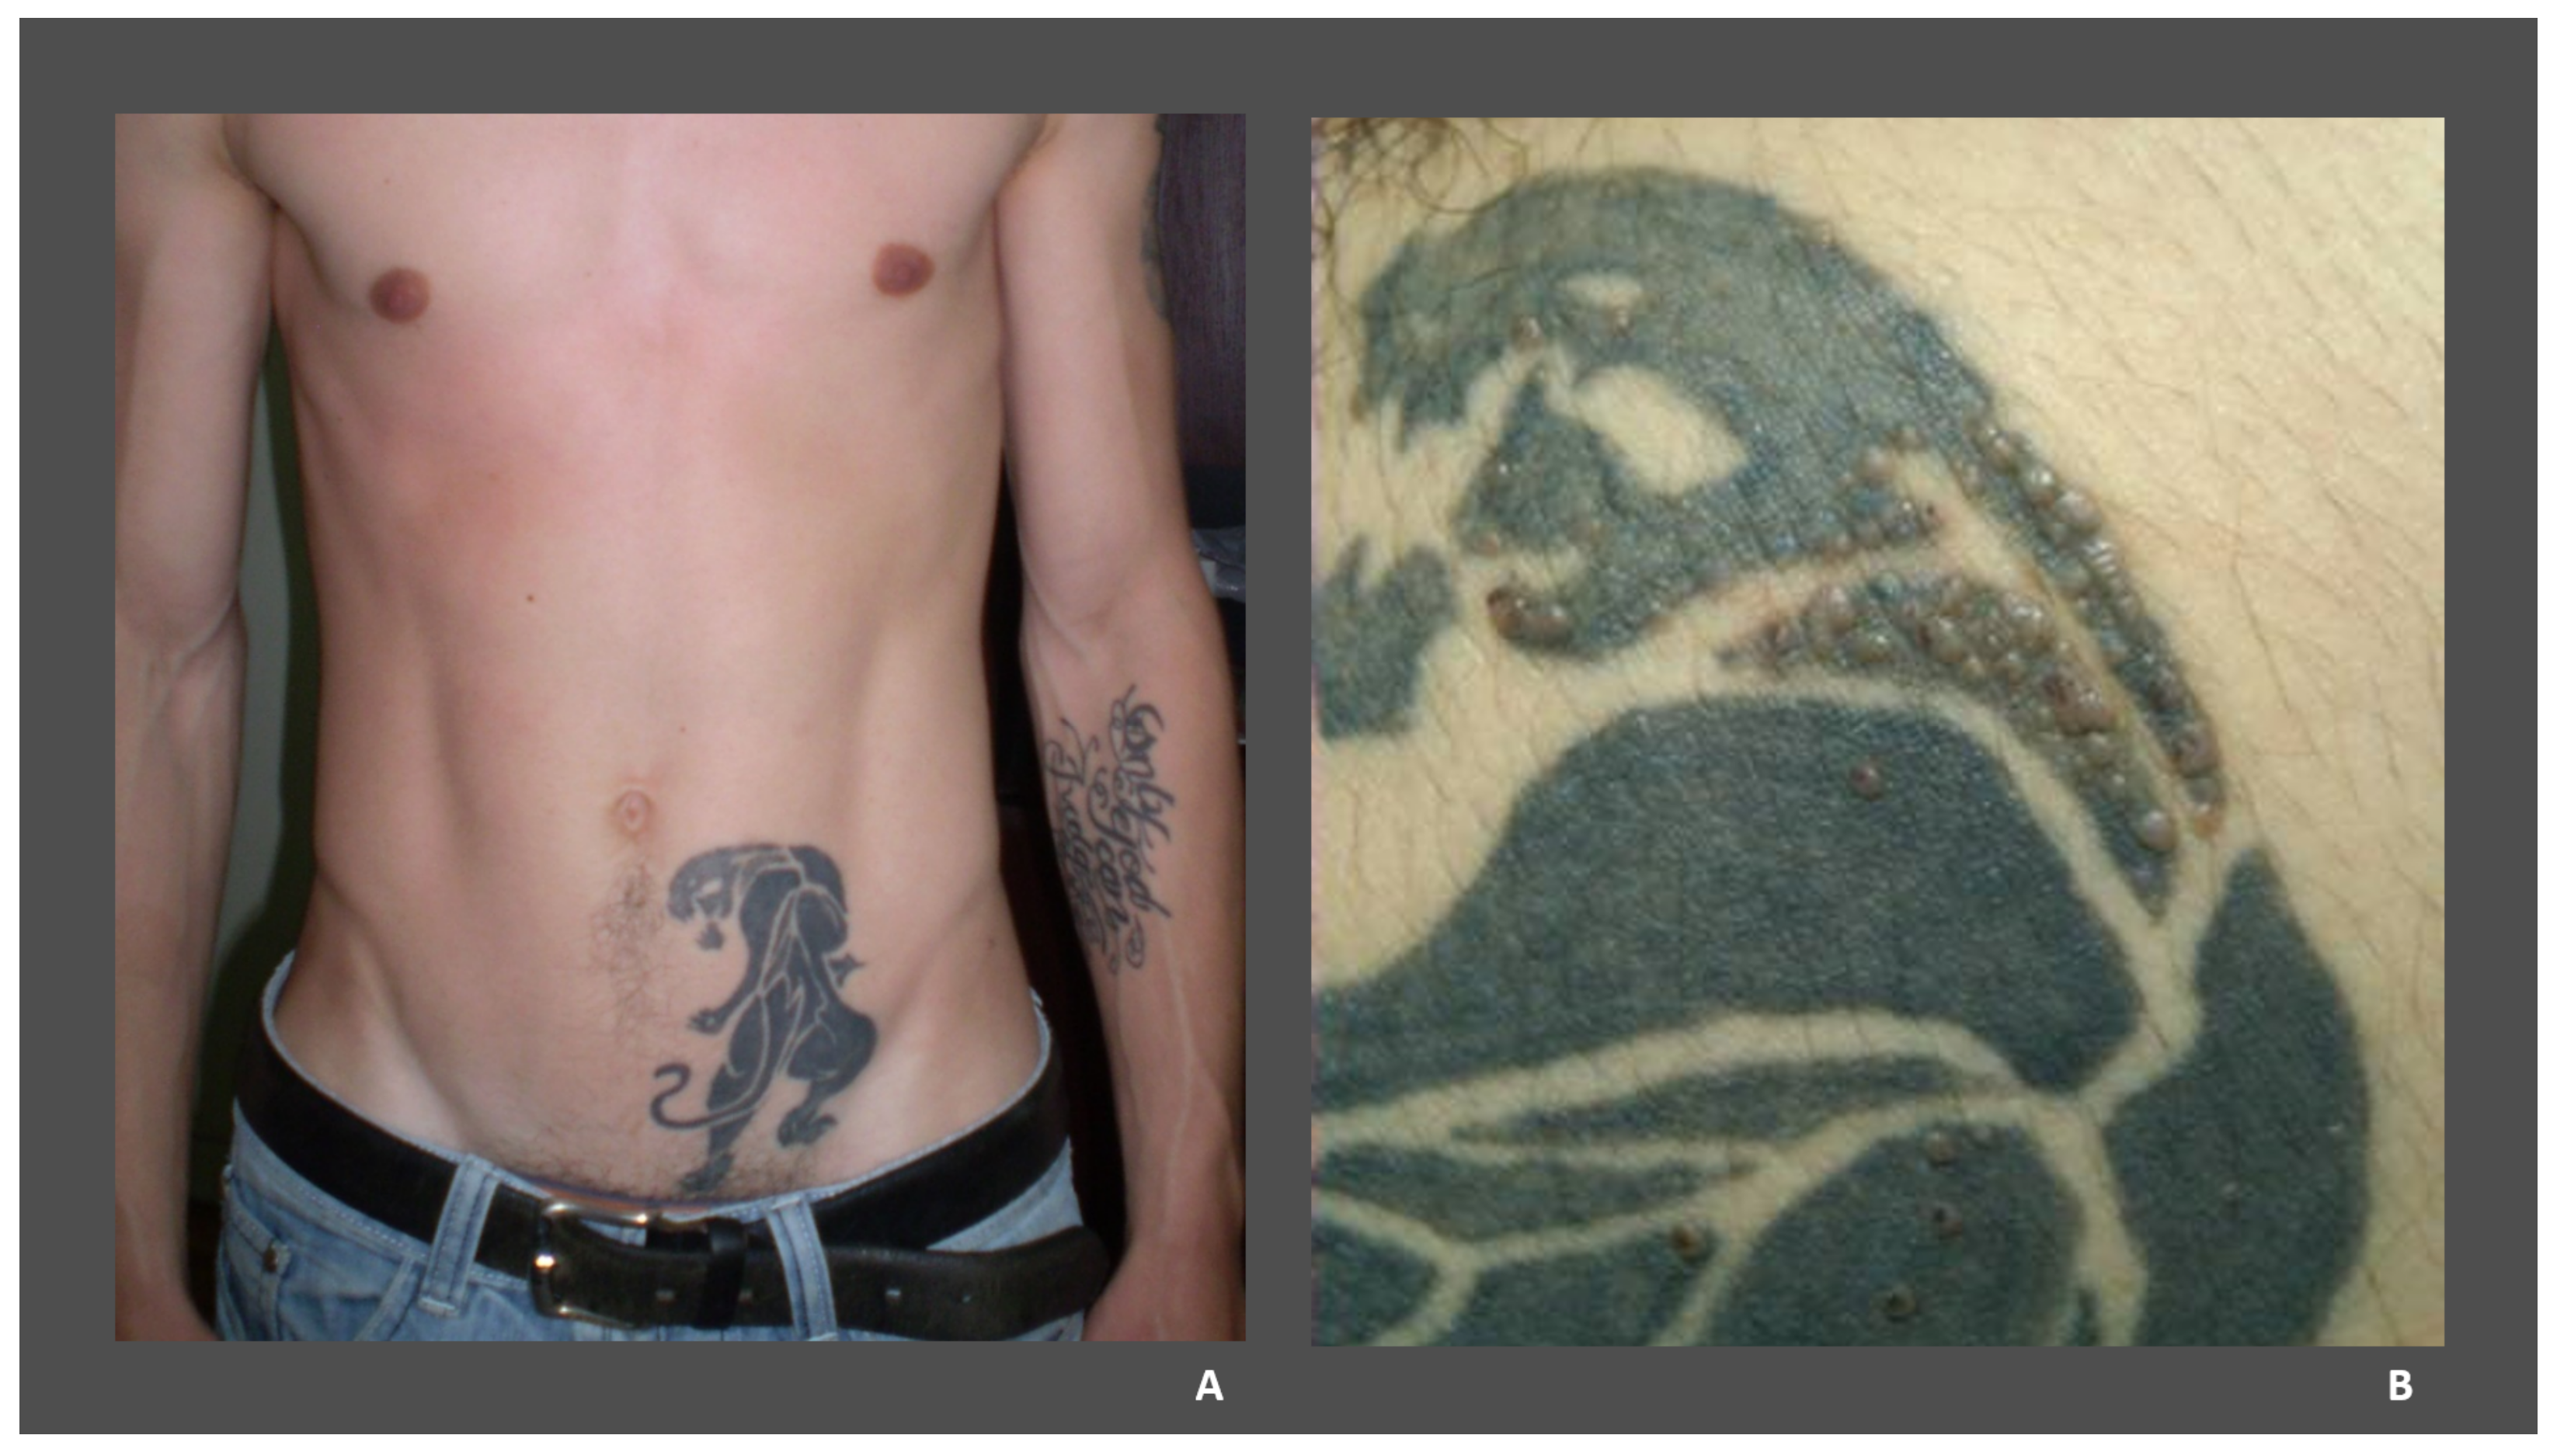 Laser Tattoo Removal  New Pico FracTAT  Skintellect